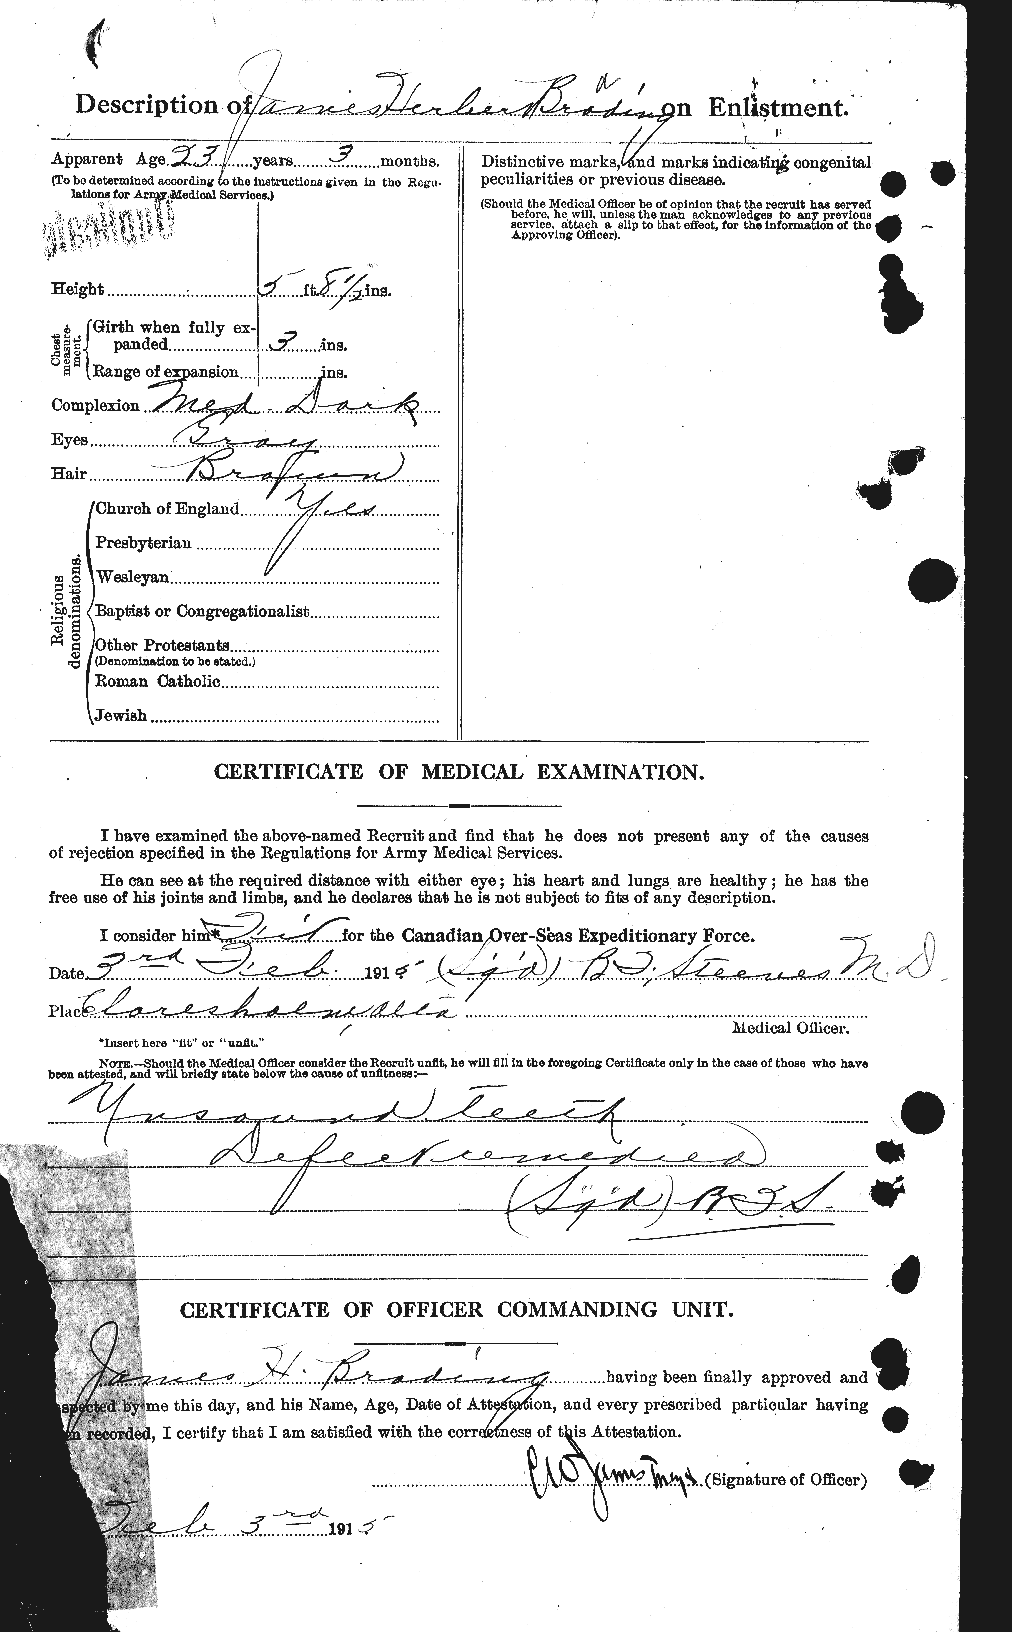 Personnel Records of the First World War - CEF 256871b